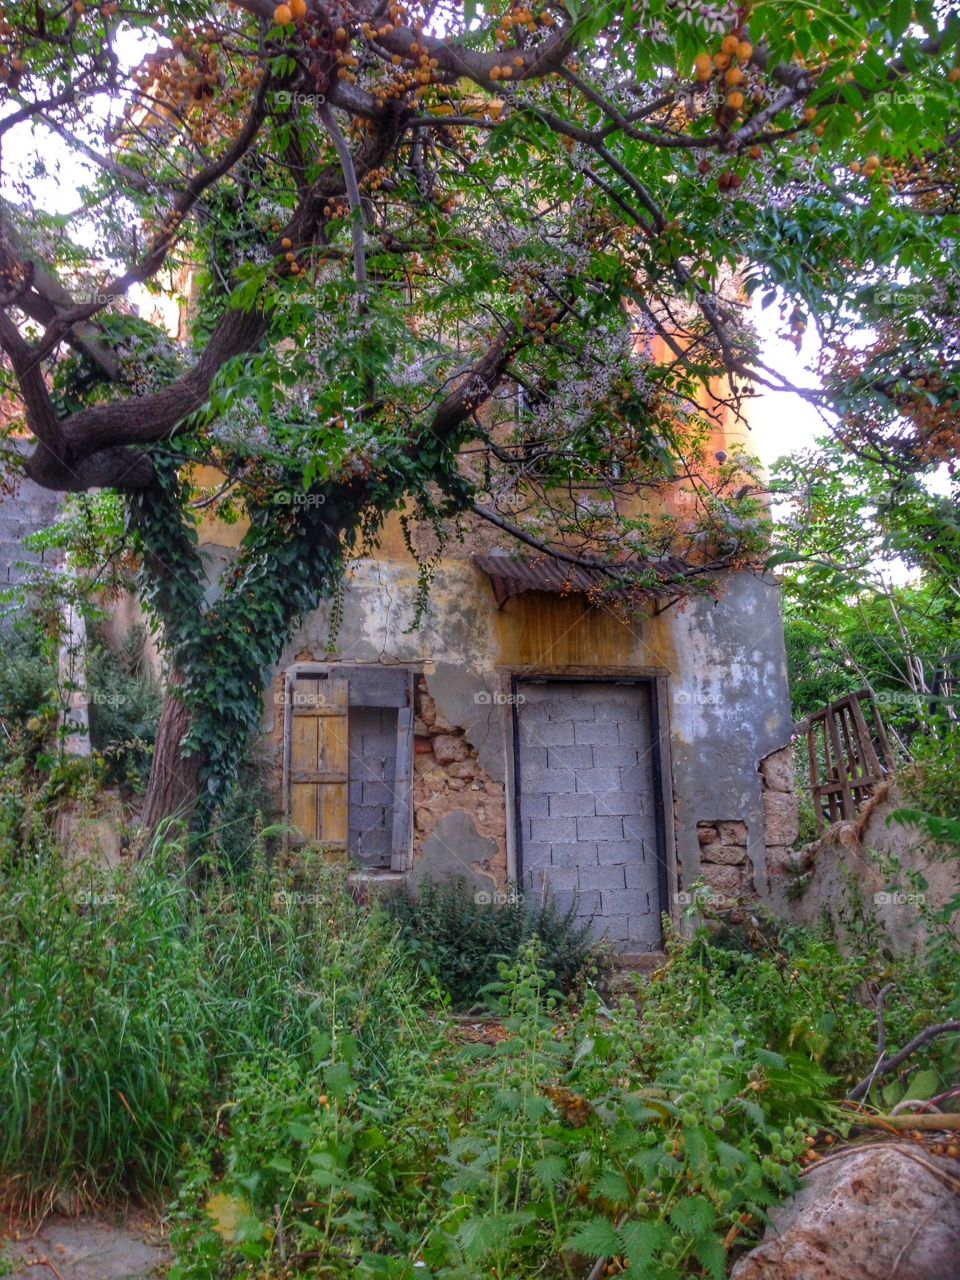 Delapidated house